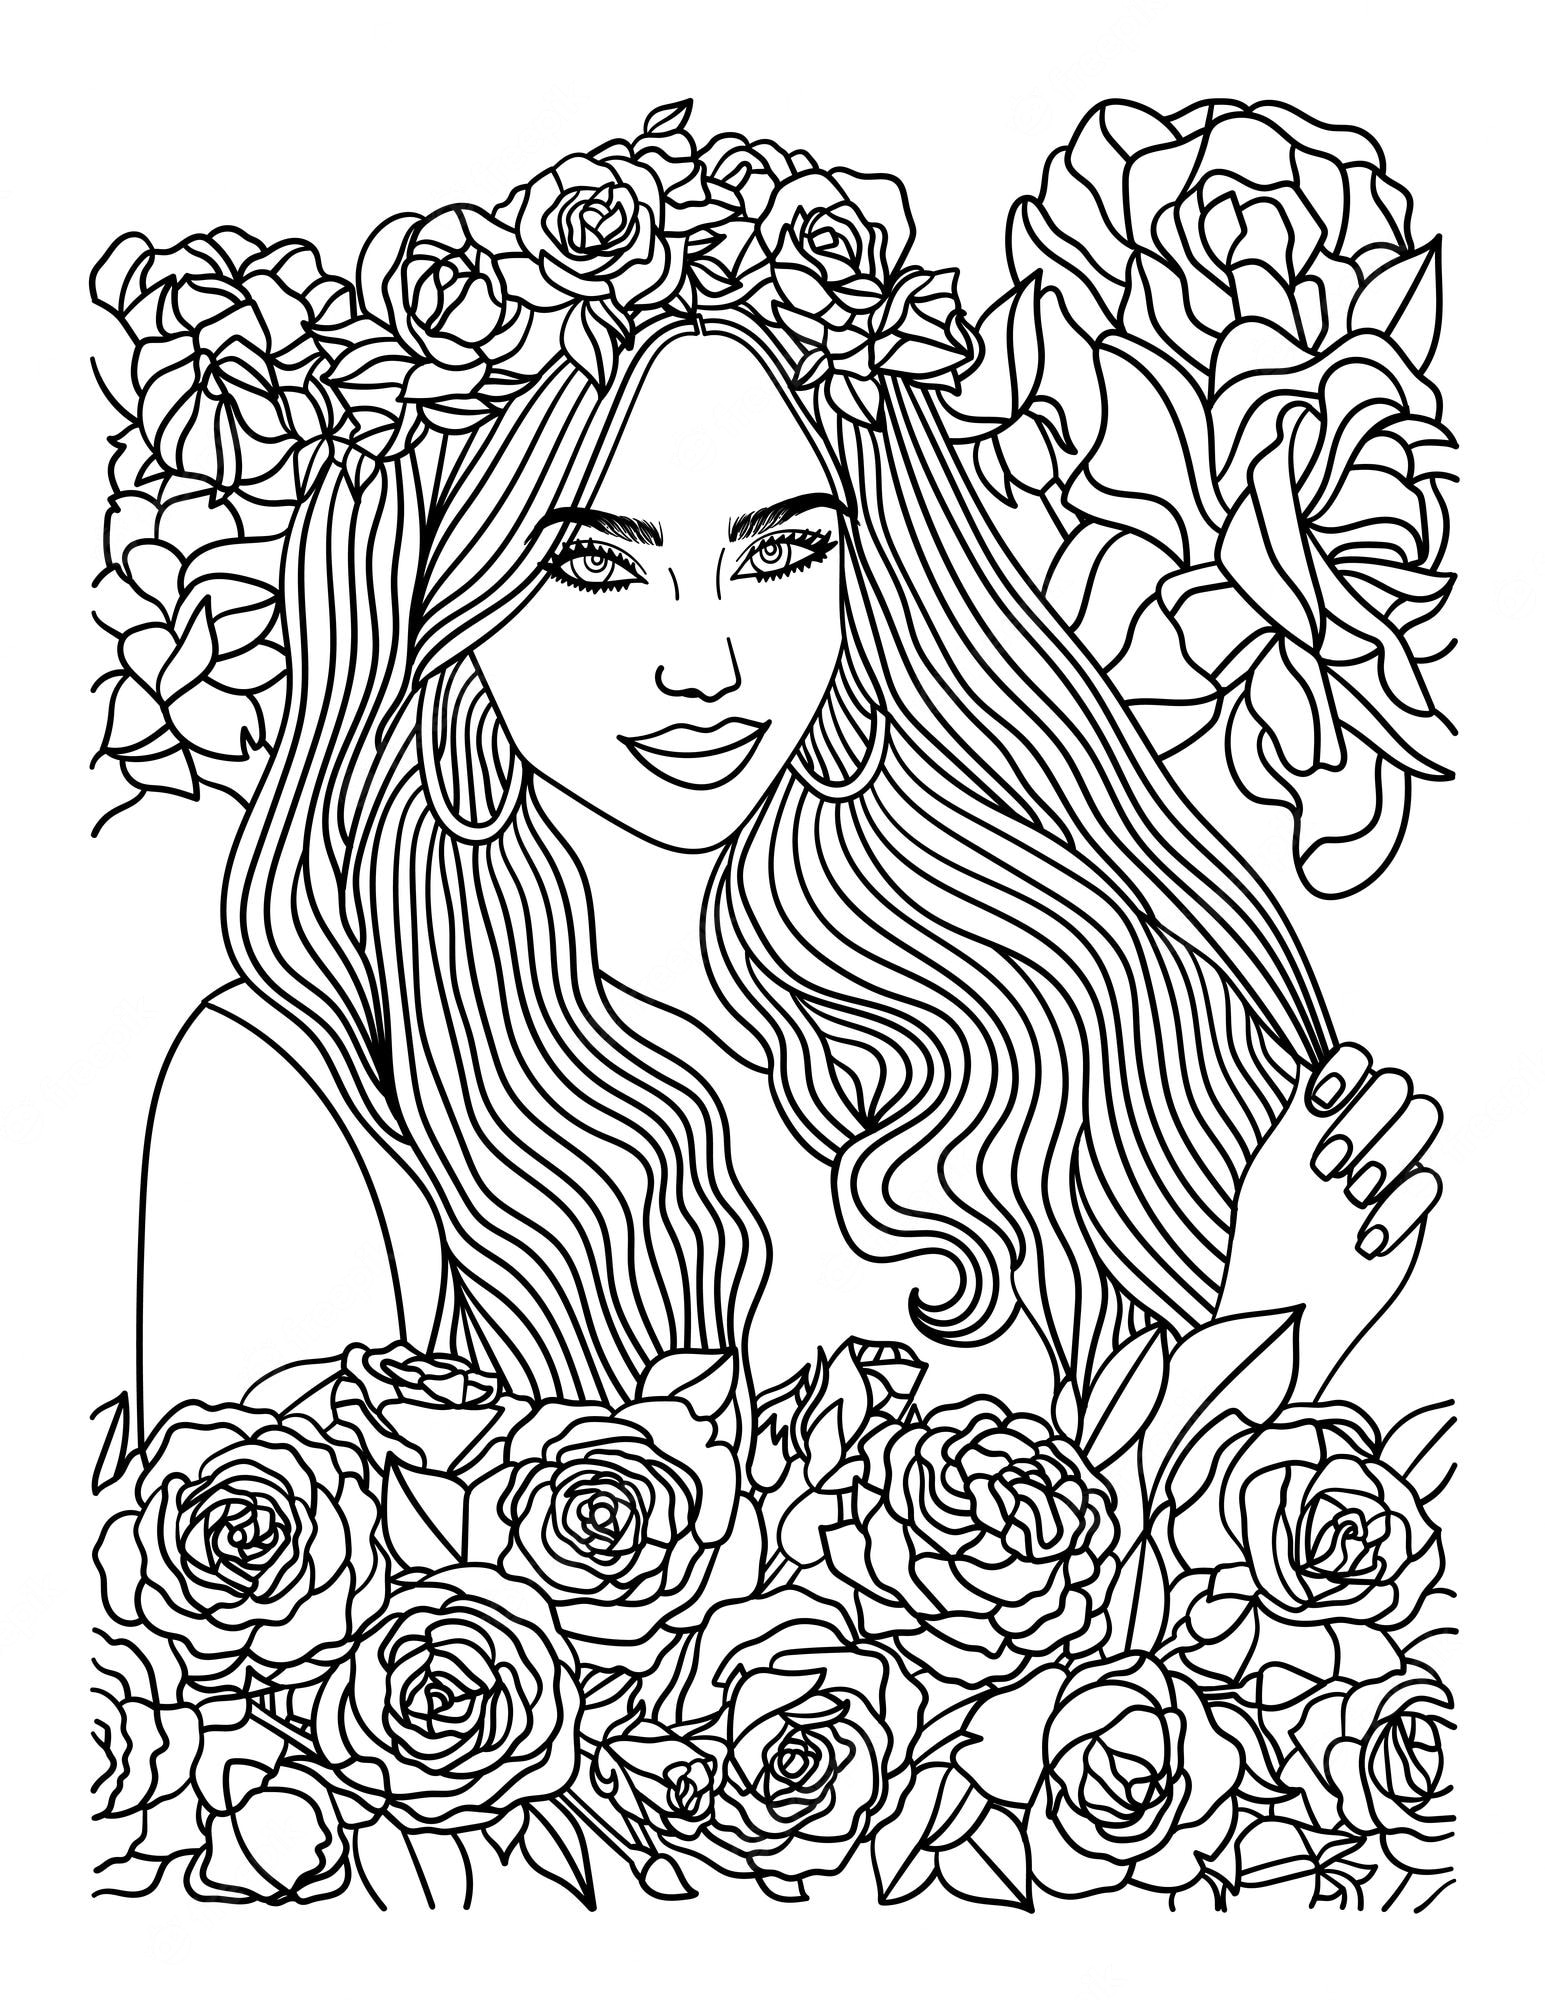 Premium Vector | Asian flower girl coloring page for adults